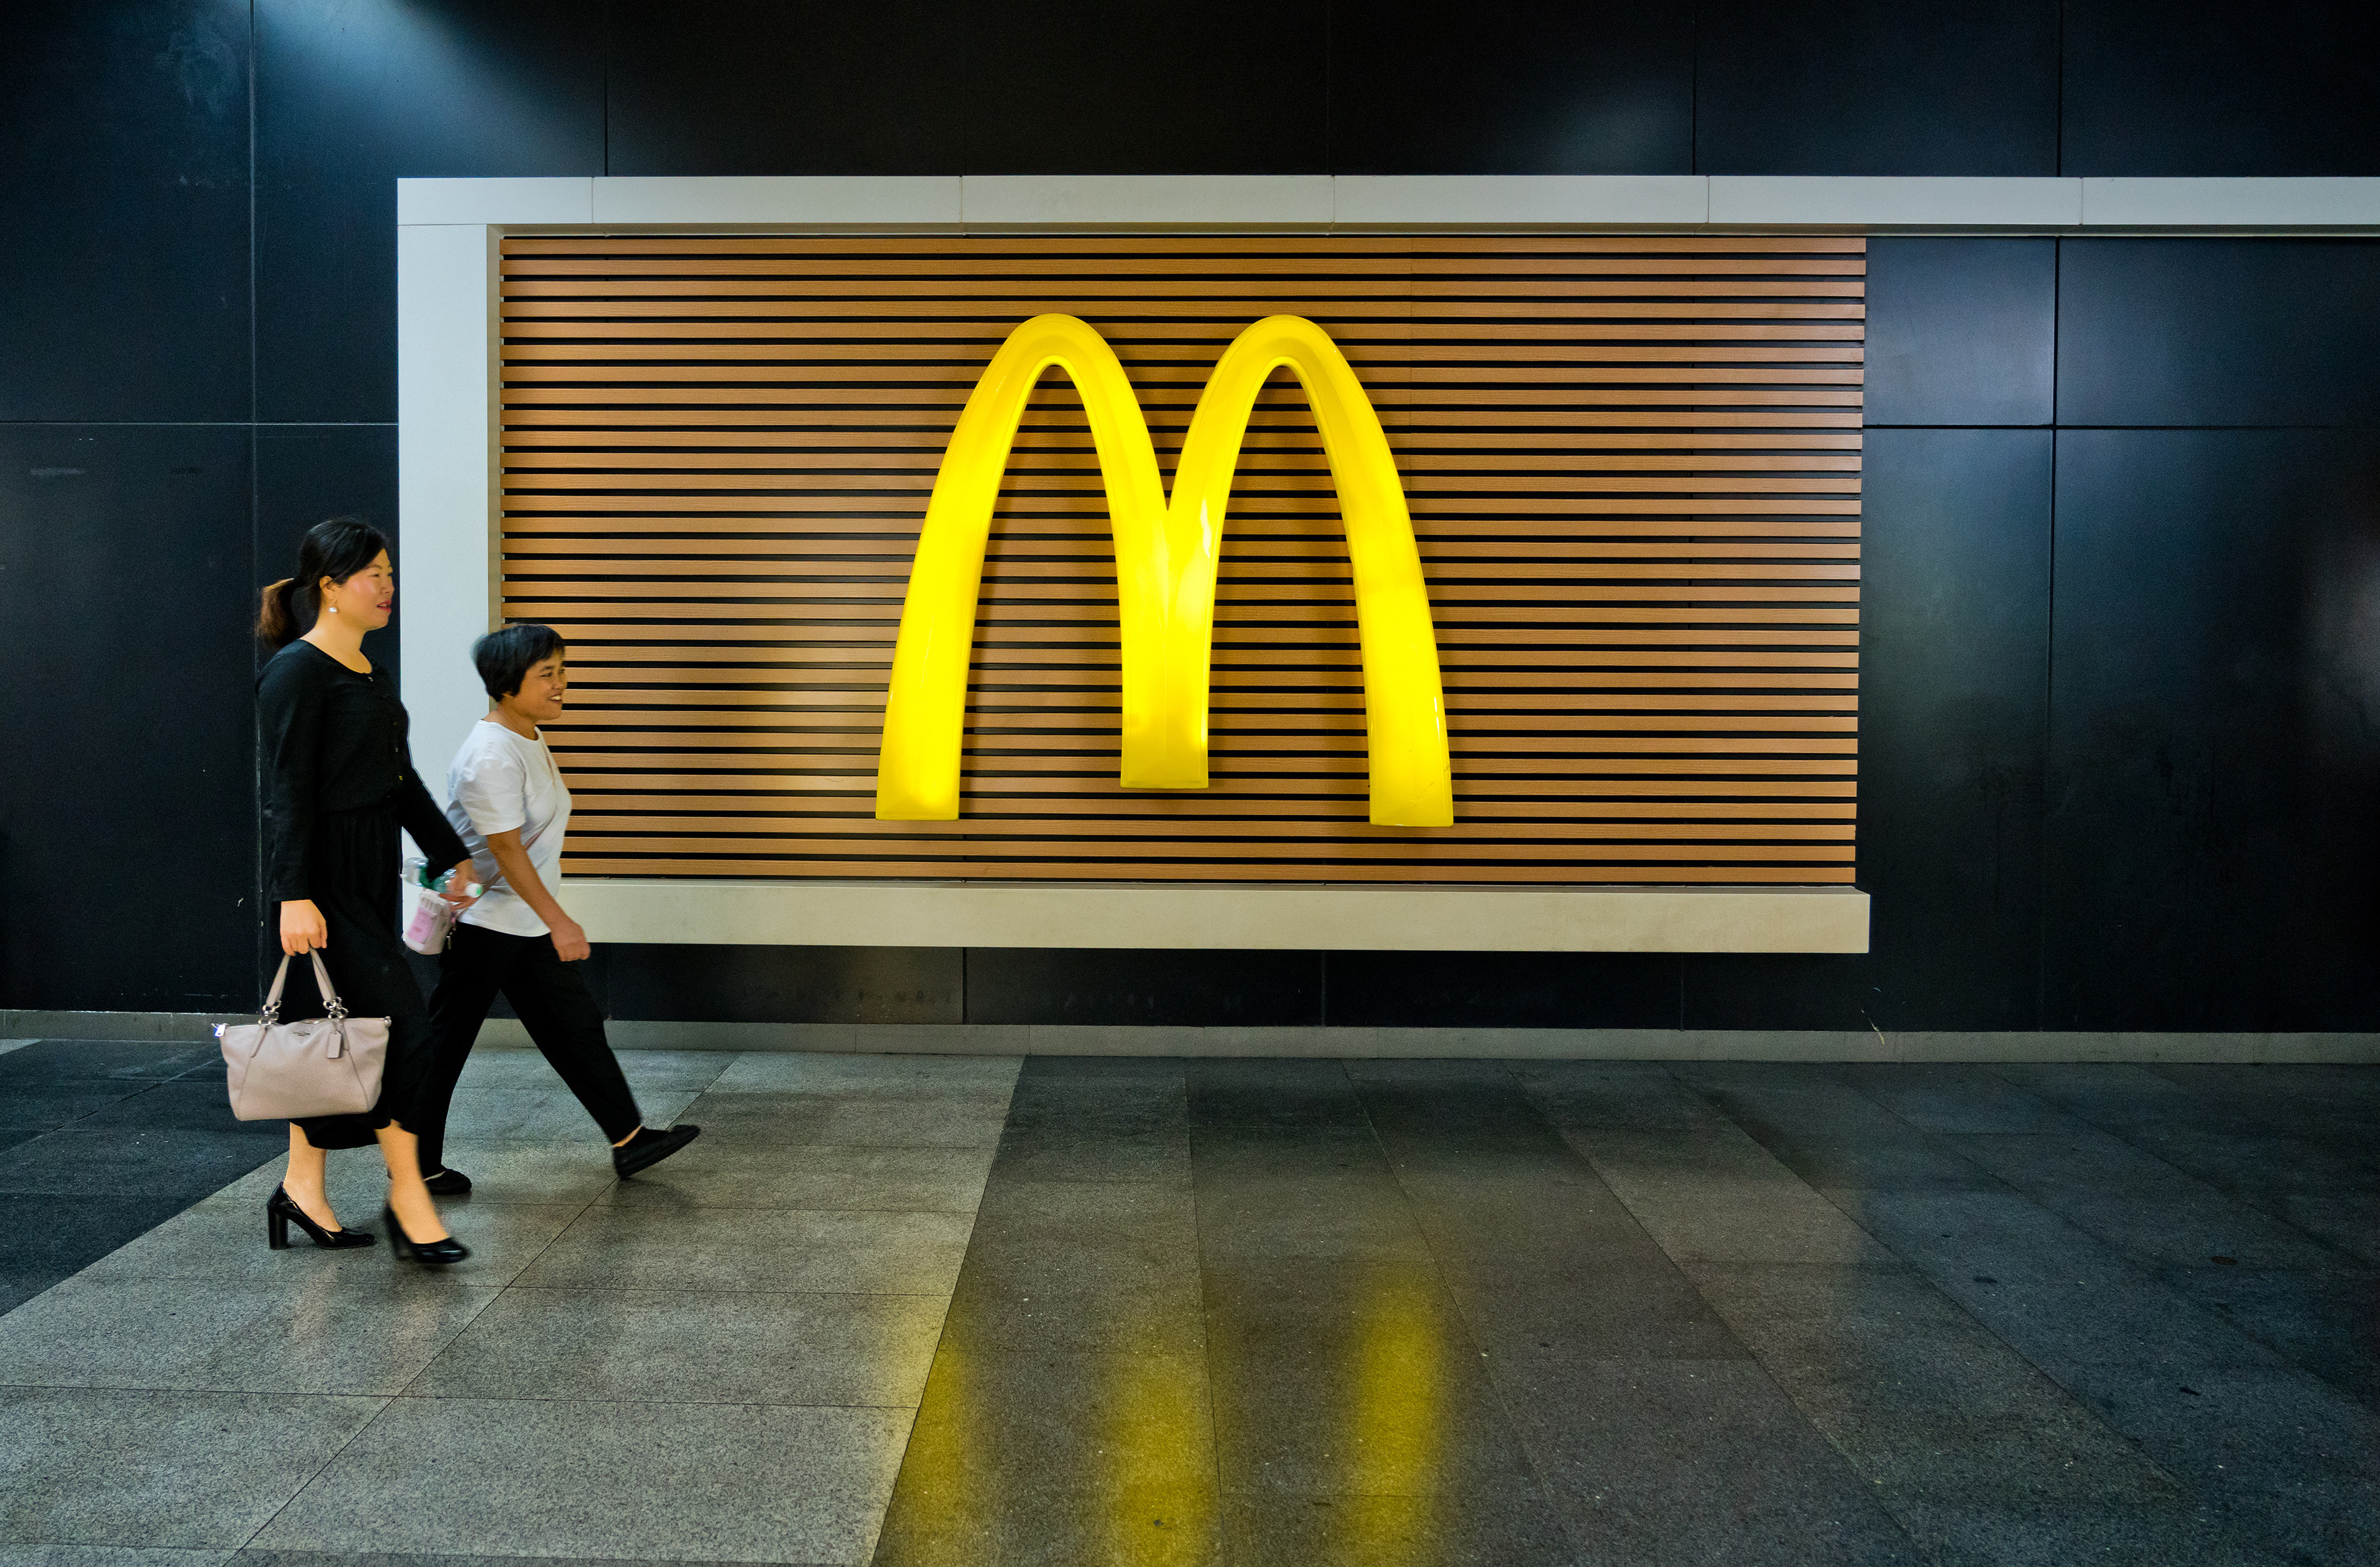 [Shutterstock] Shenzhen, China - October 22, 2019: Outside McDonald’s fast food restaurant, People walking casually towards.
Stock Photo ID: 1663339621